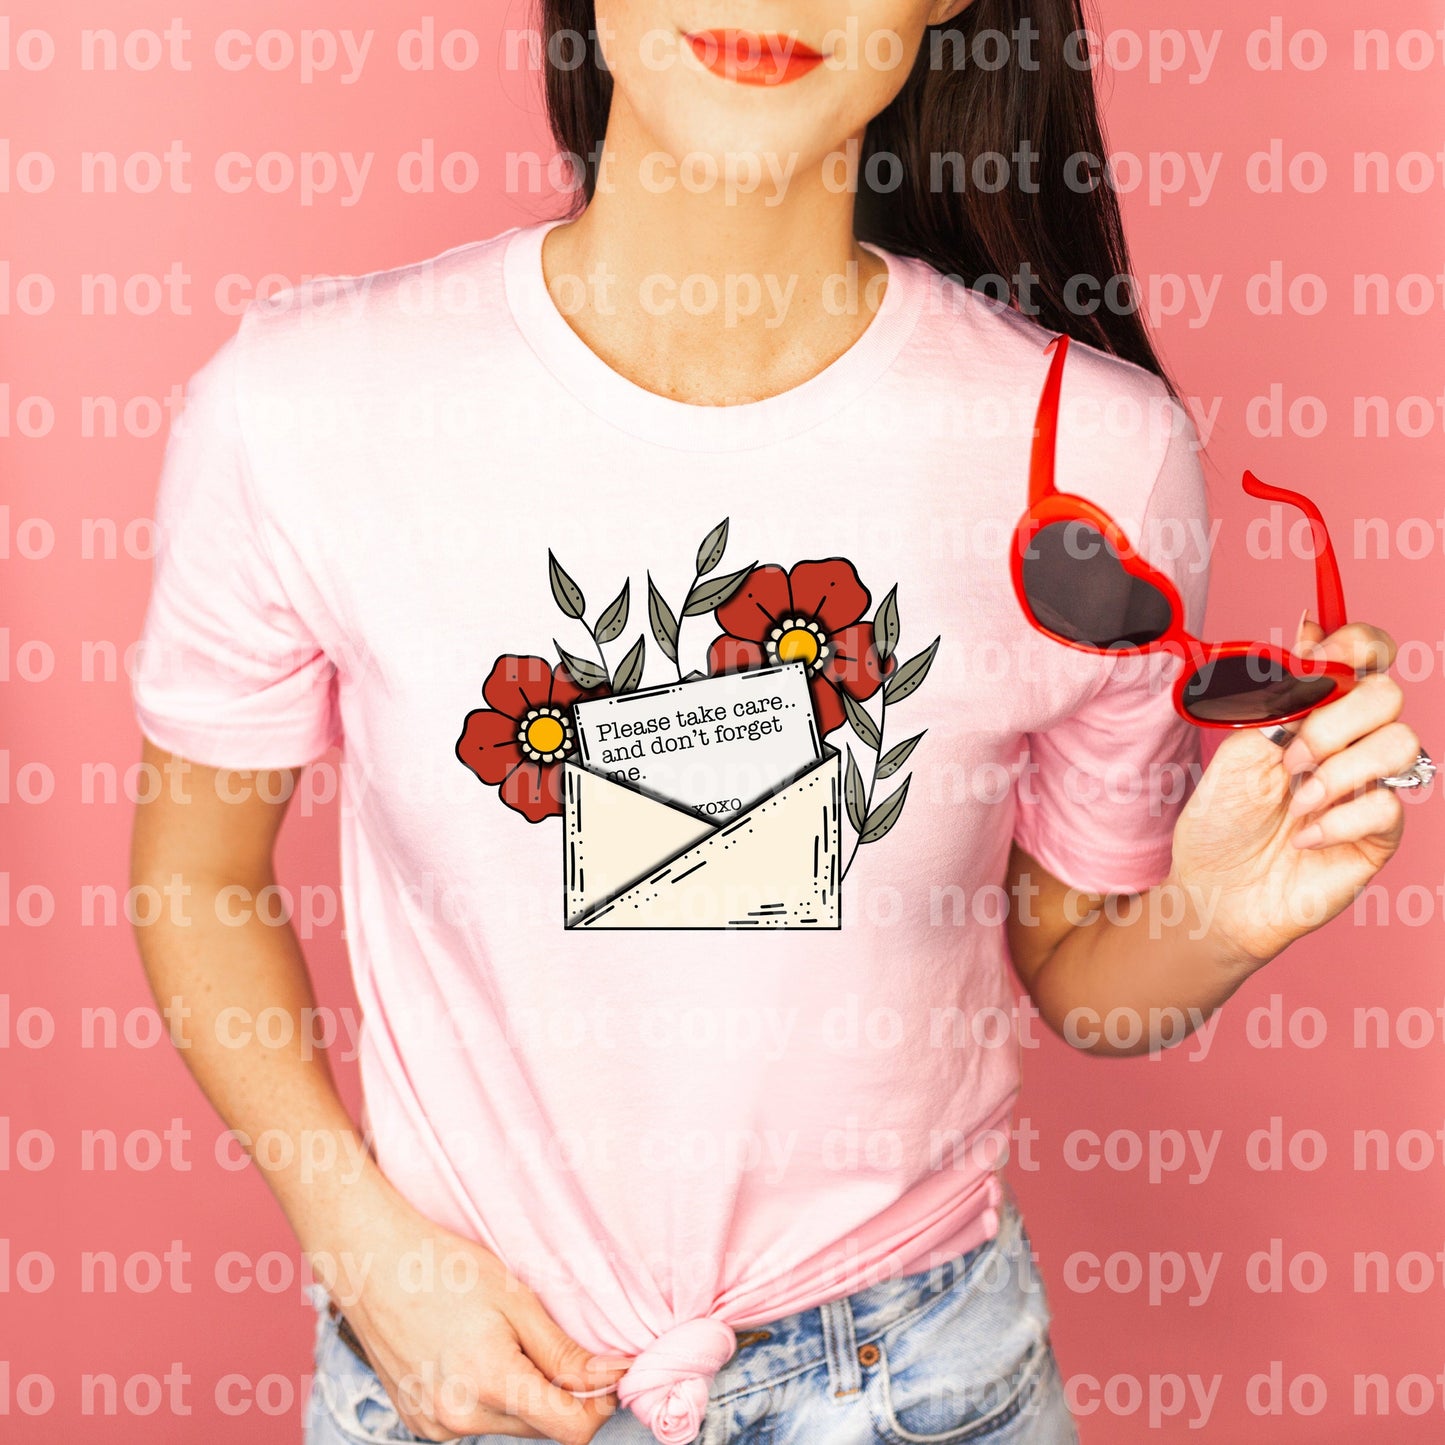 Please Take Care And Don't Forget Me Xoxo Full Color/One Color Dream Print or Sublimation Print